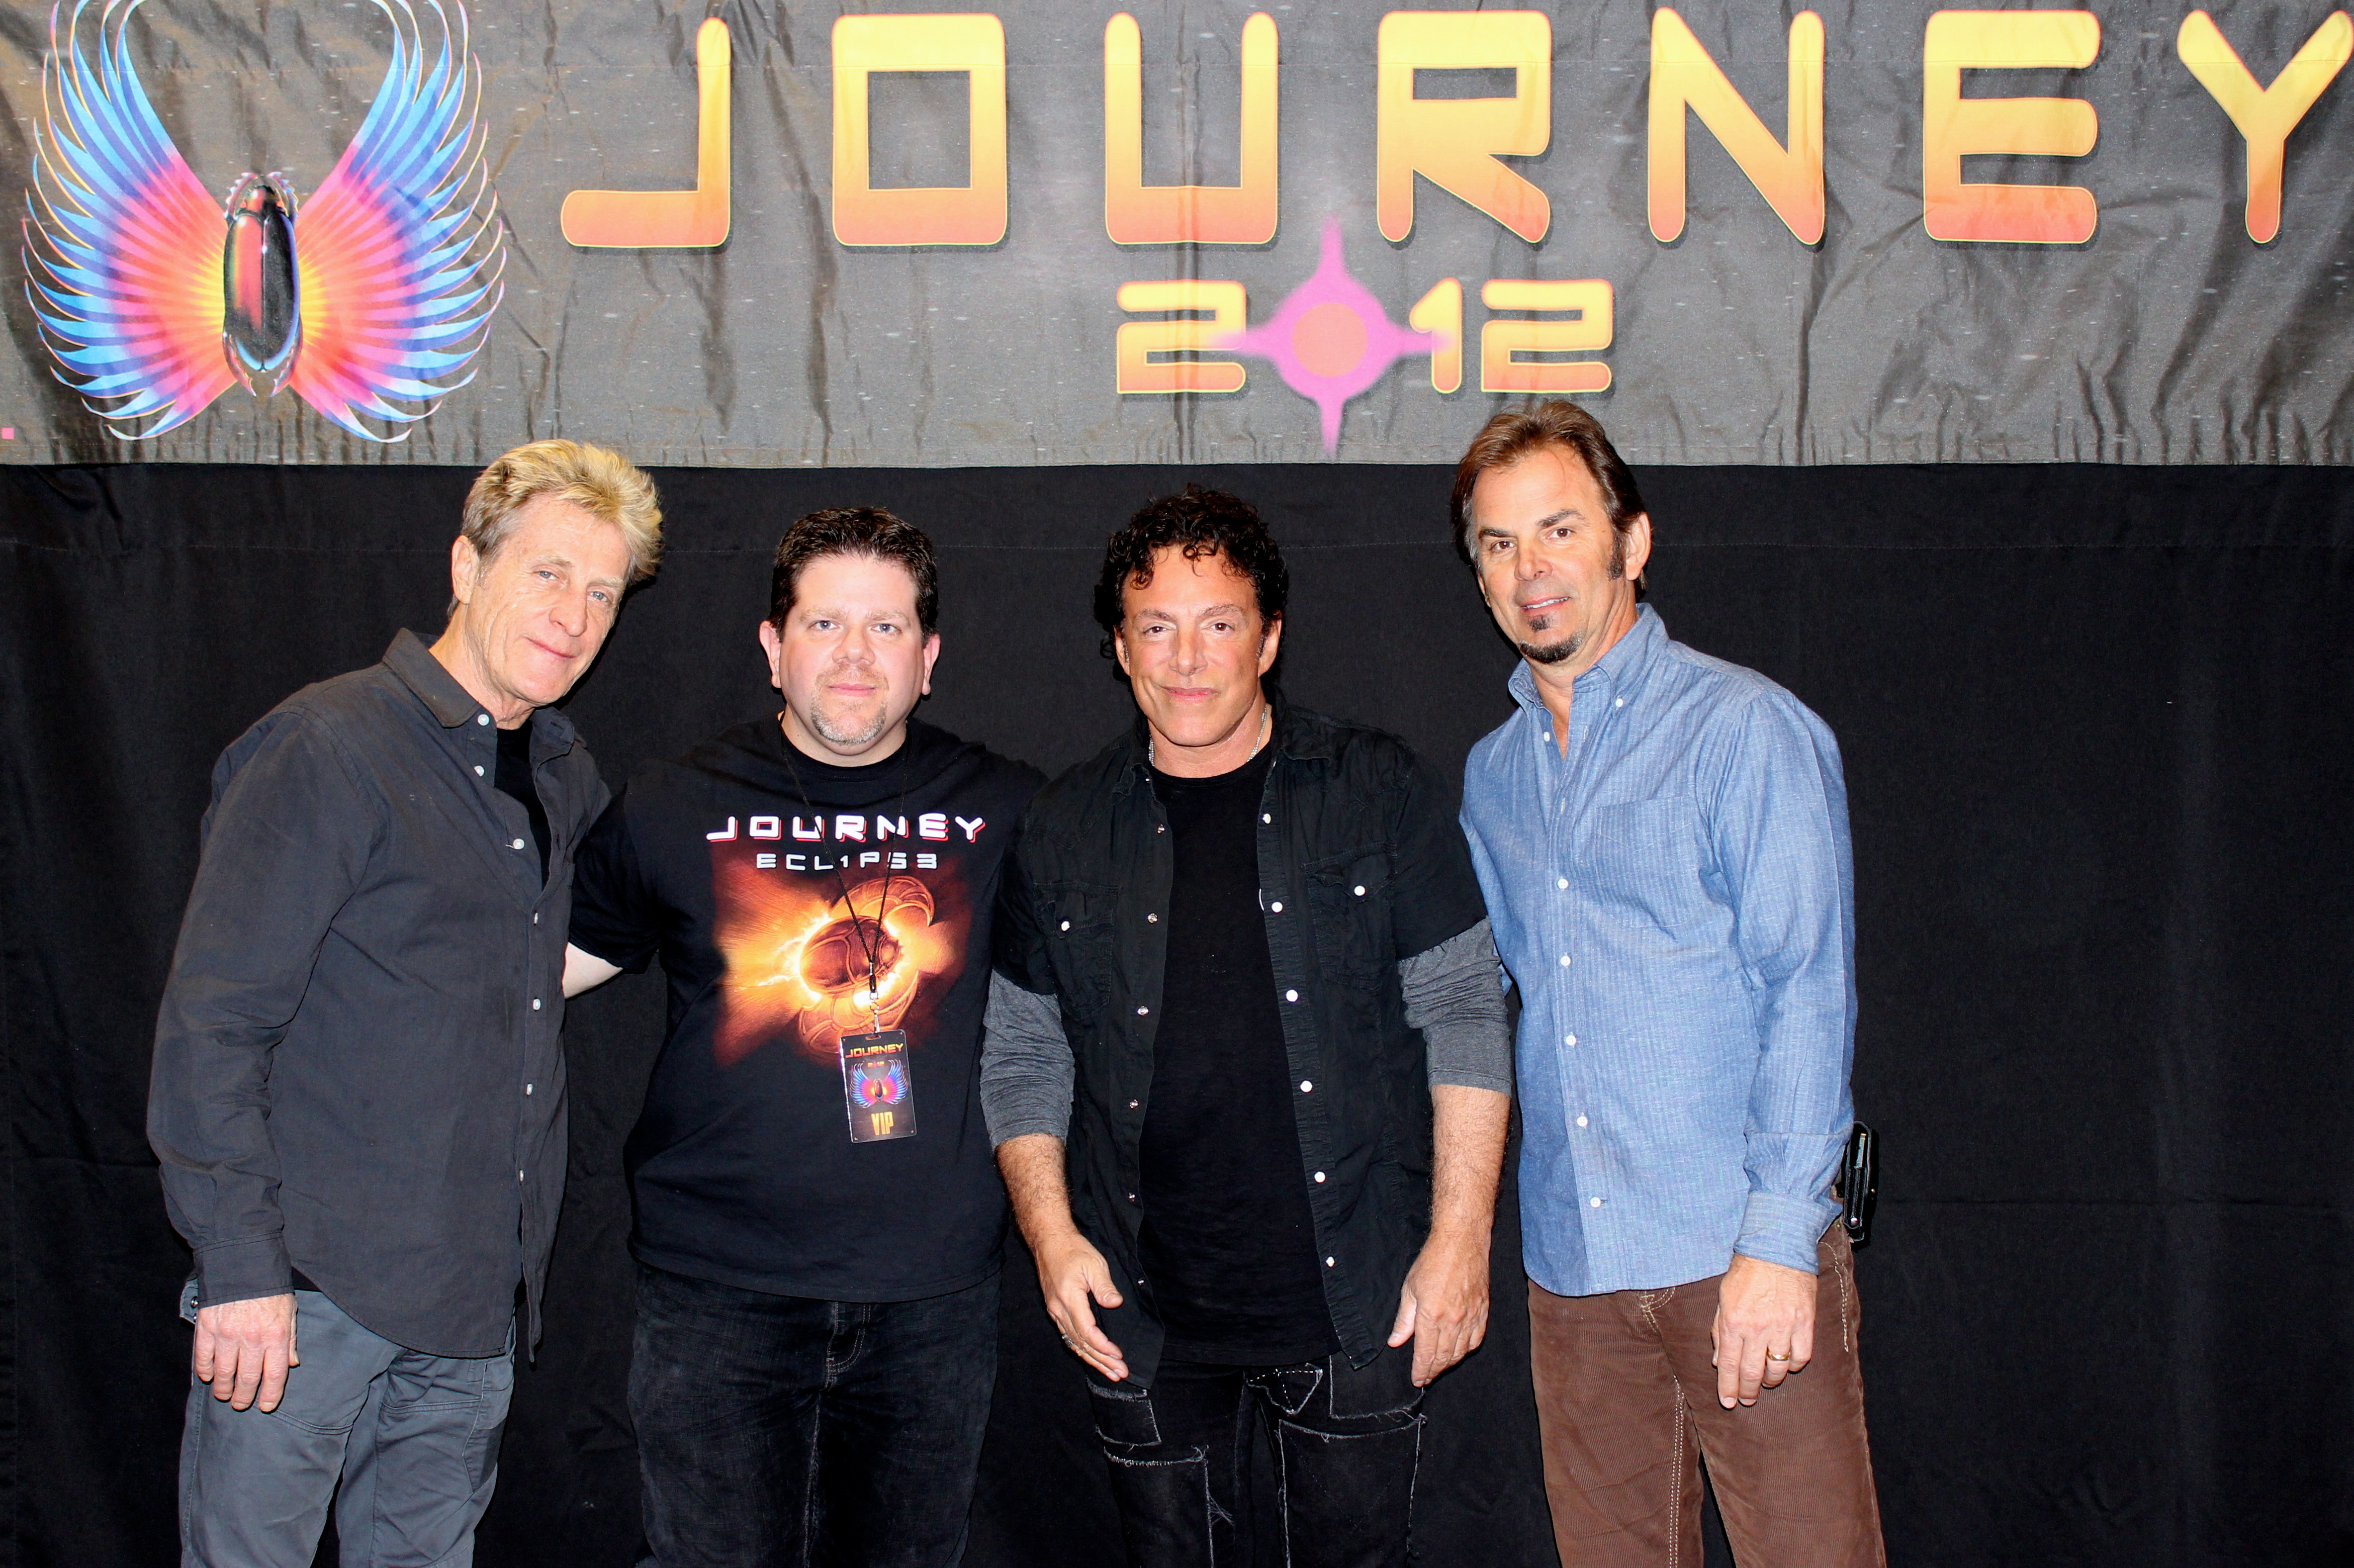 Backstage with the guys from Journey